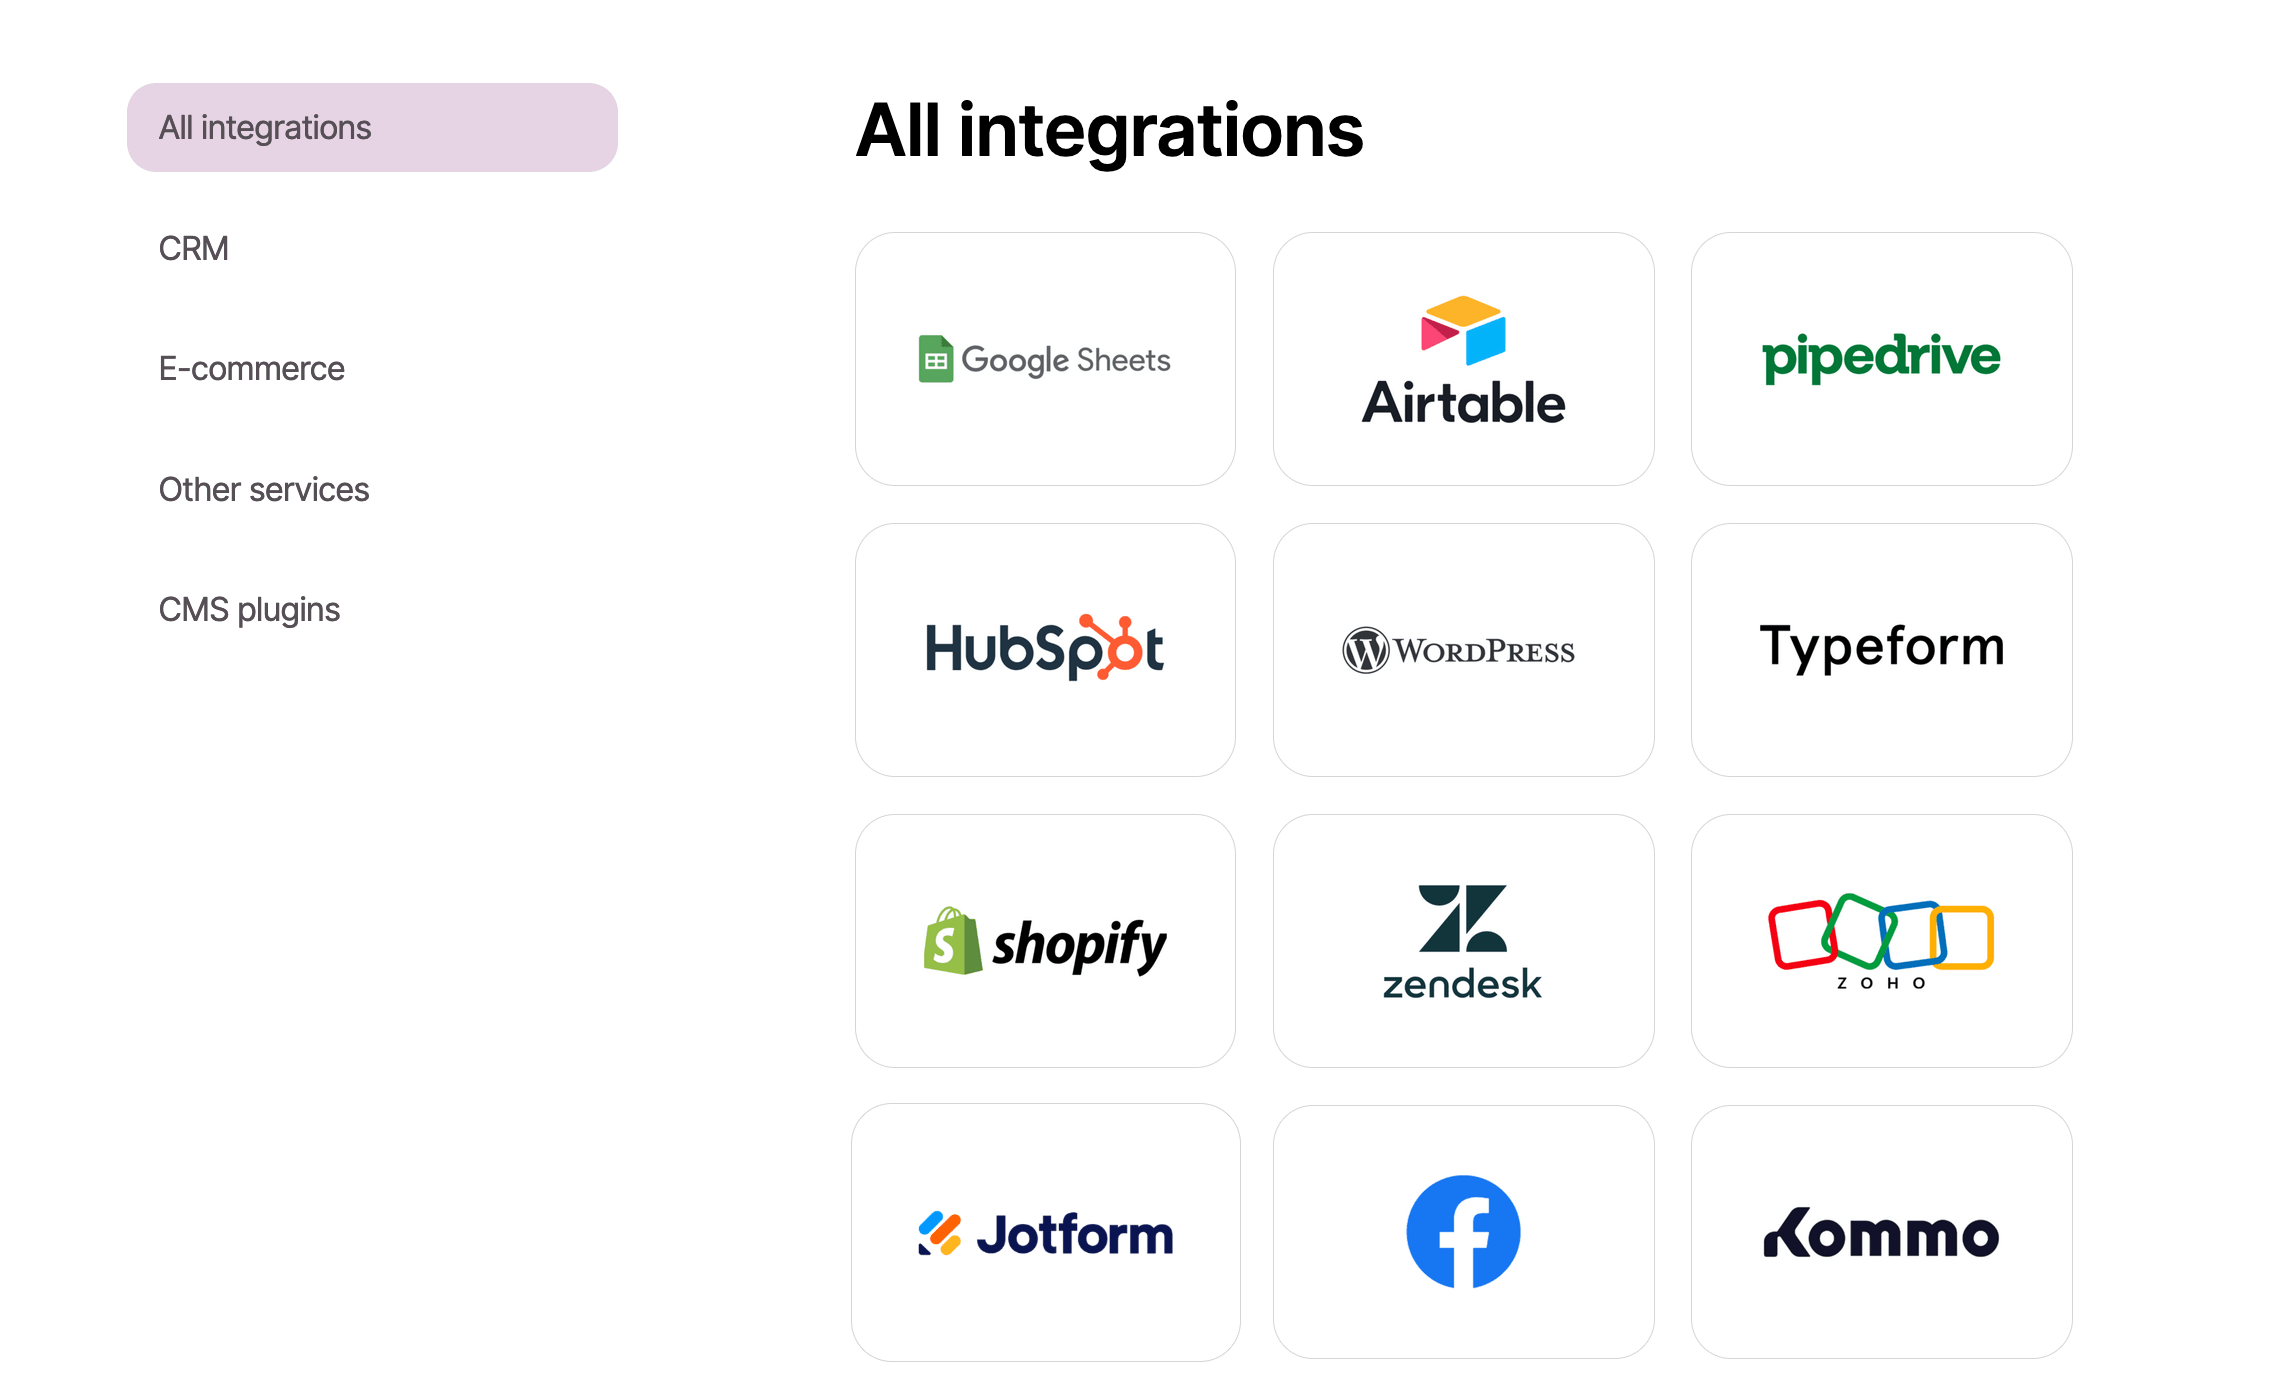 A list of Selzy's integrations: Facebook, Kommo, Google Sheets, Airtable, etc.